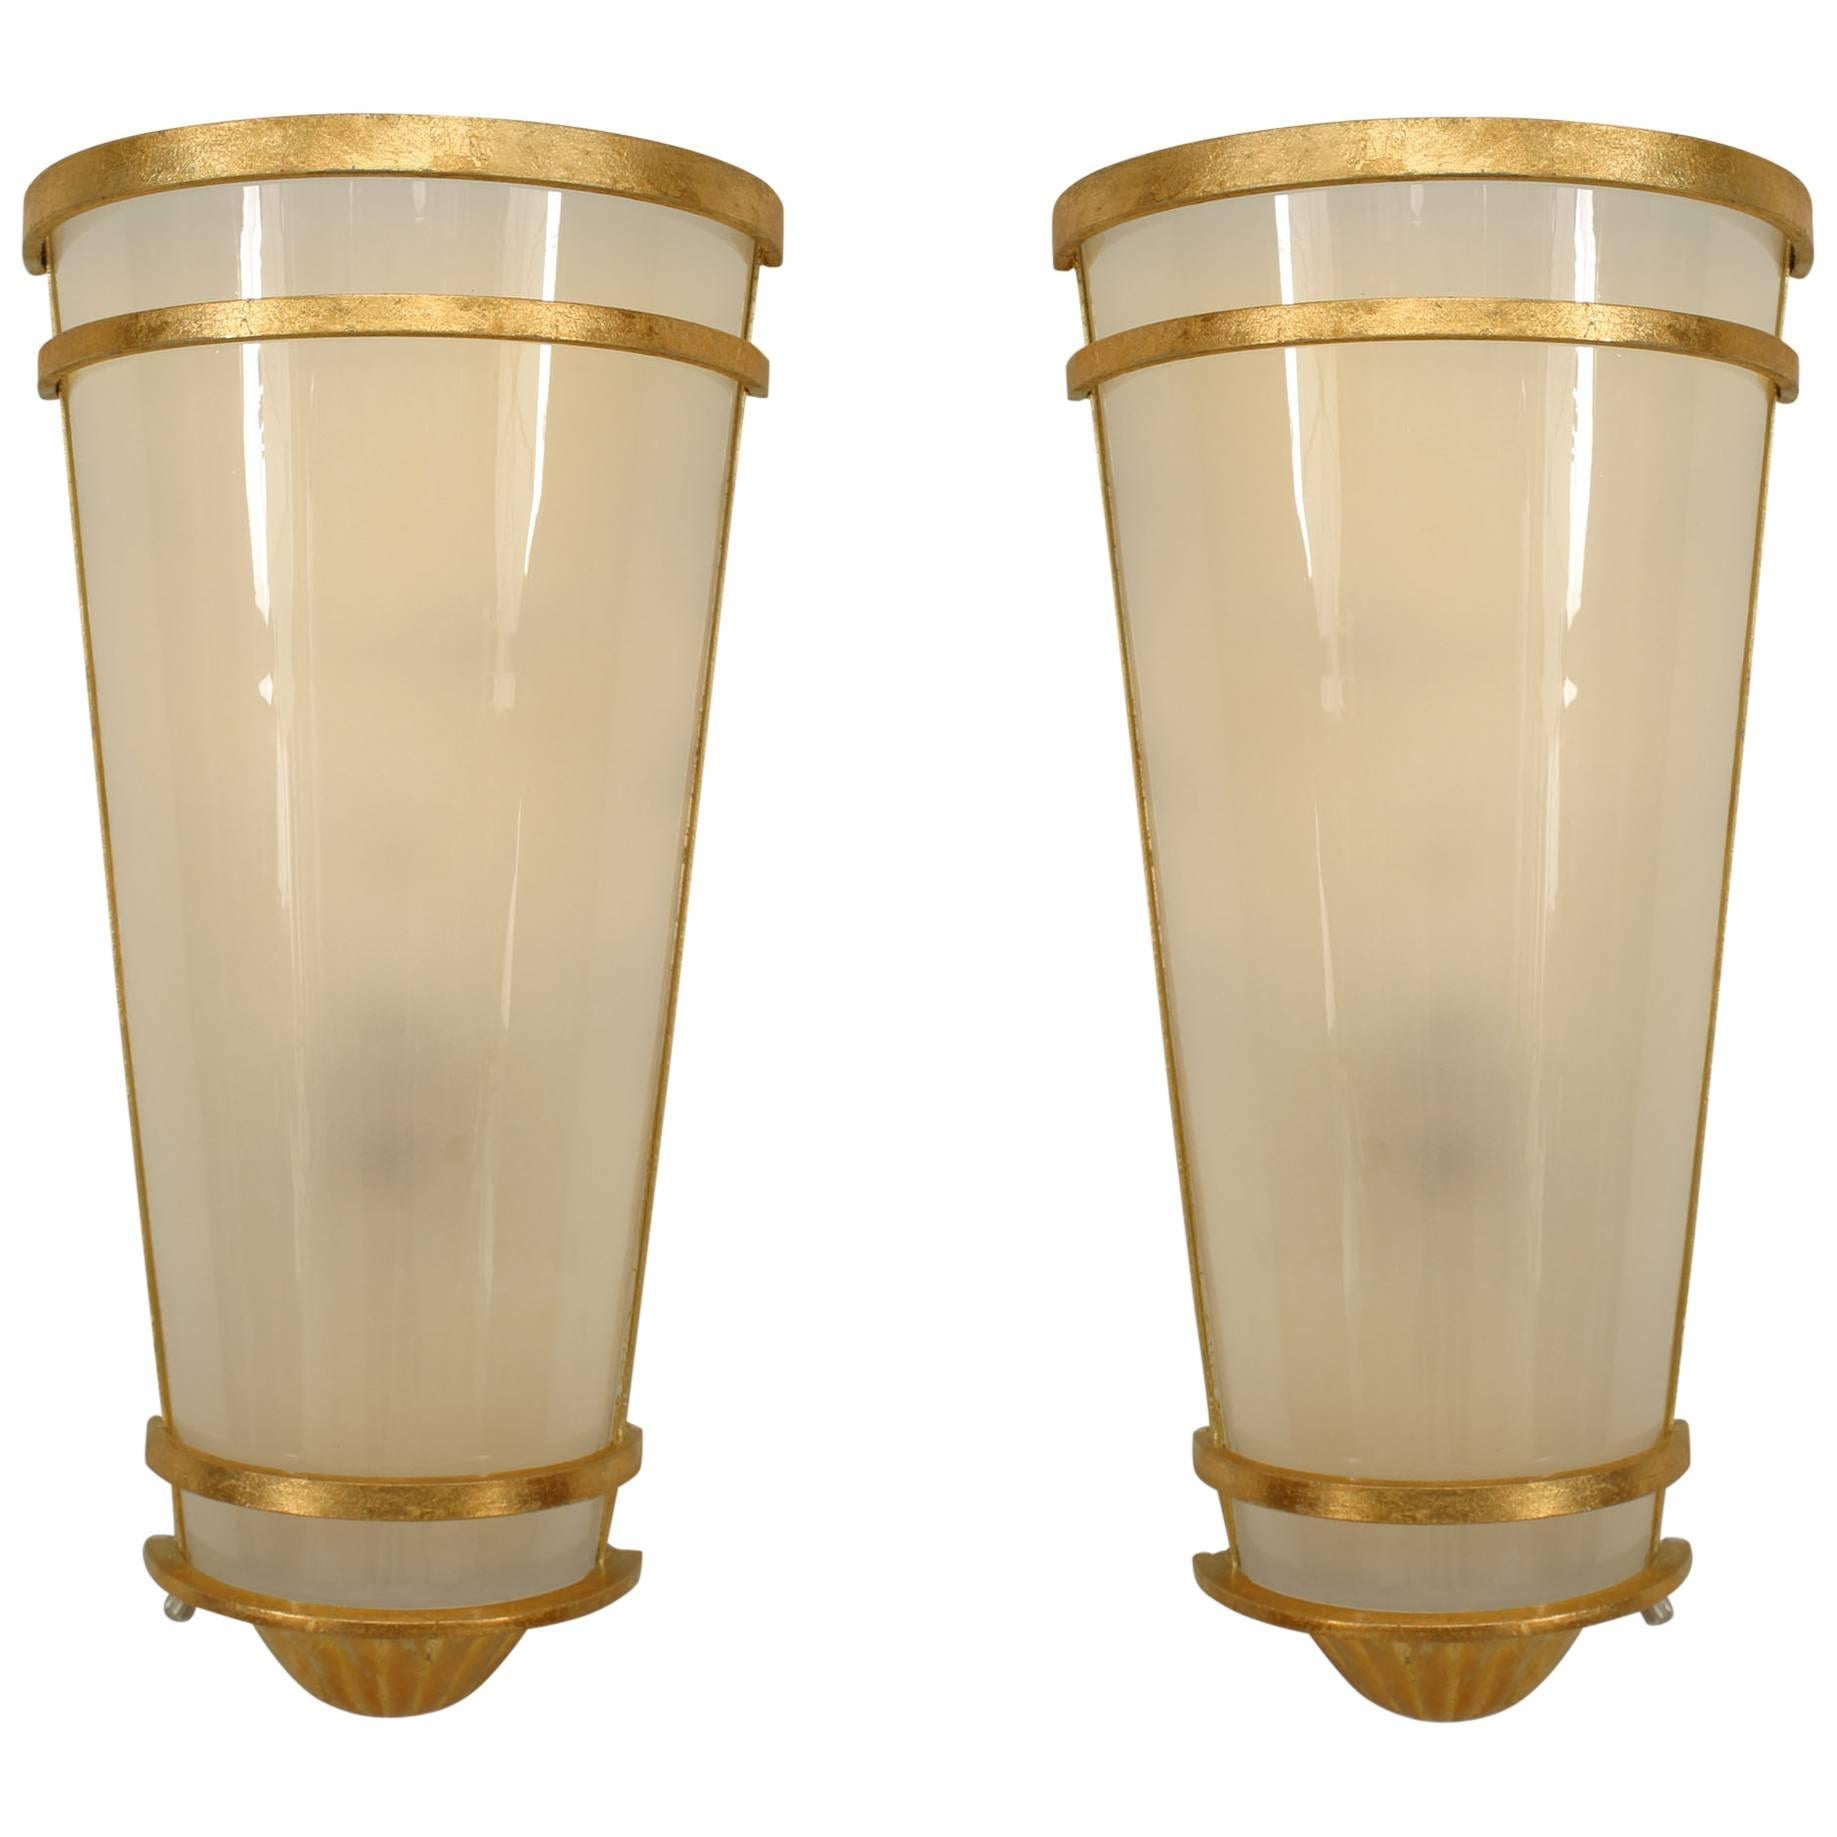 Pair of Cylindrical Gilt-Trimmed Frosted Glass Wall Sconces For Sale